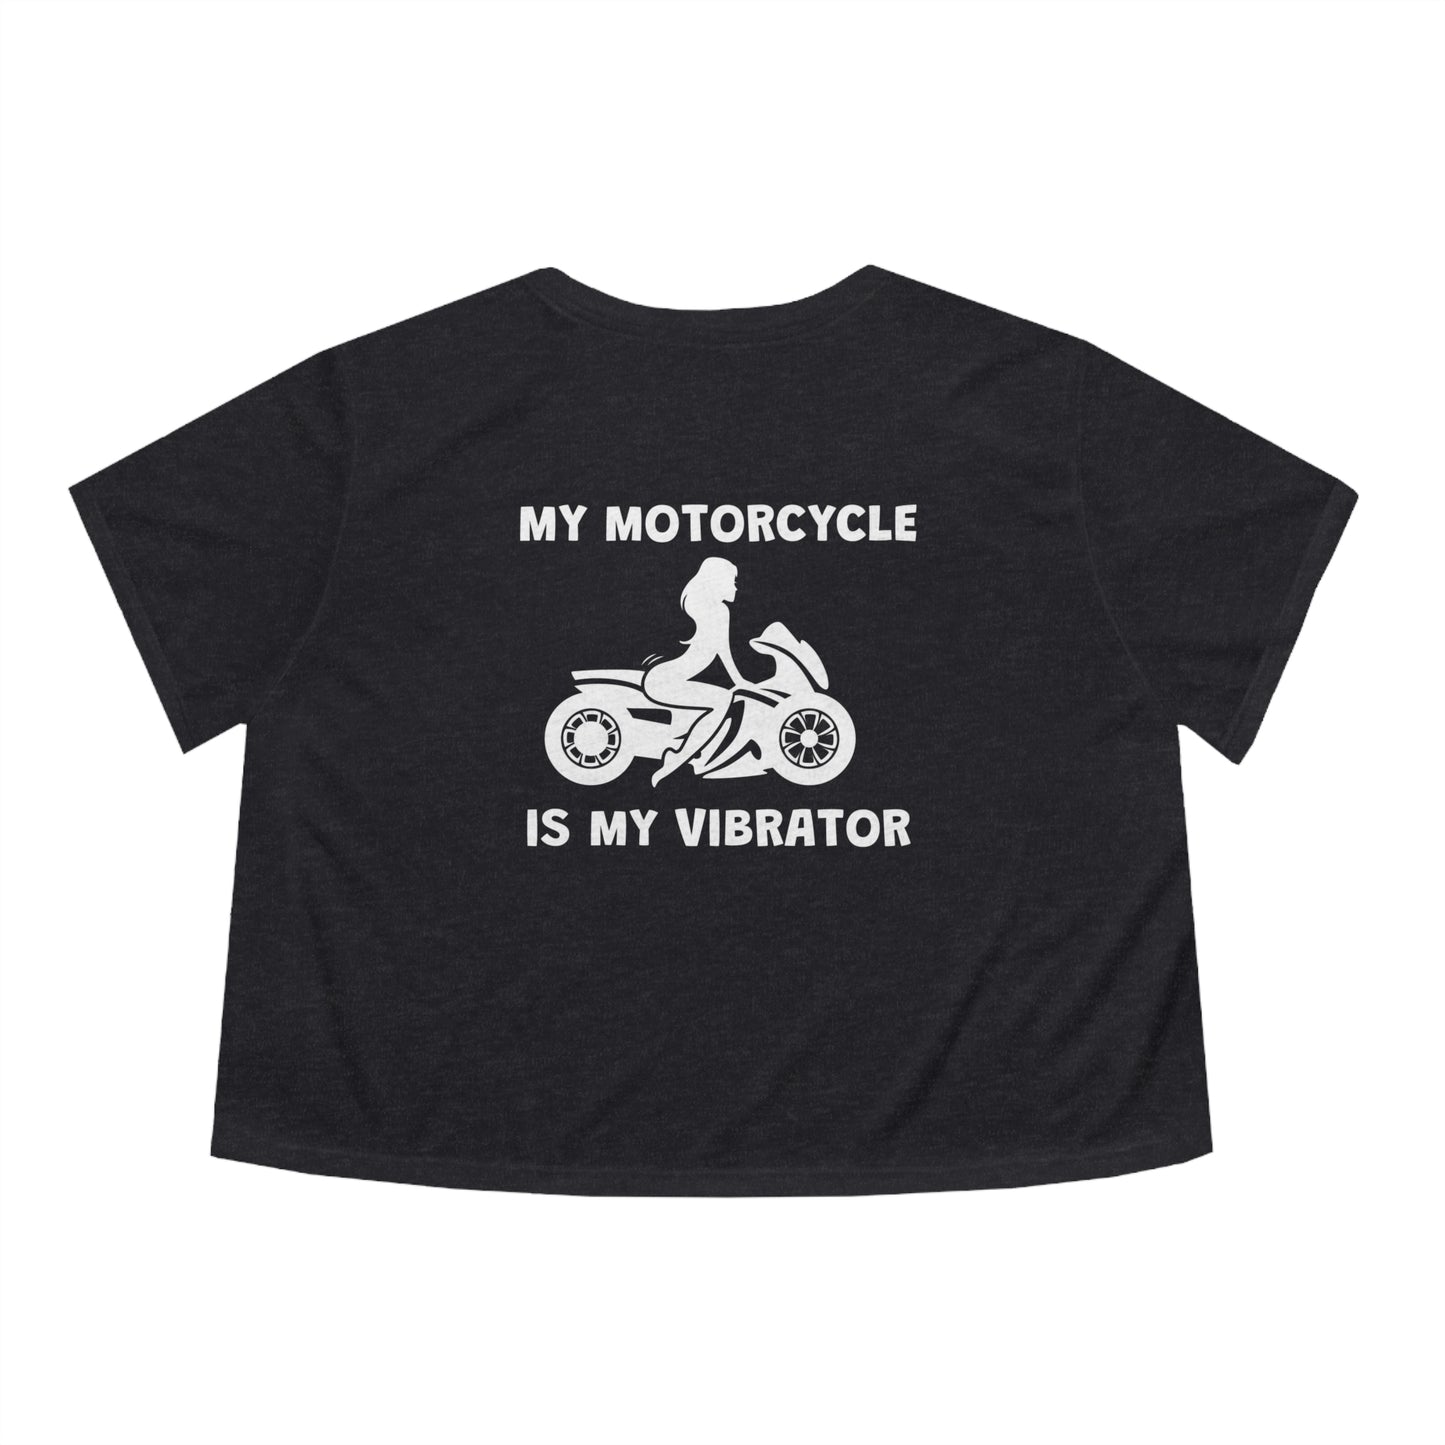 My Motorcycle Is My Vibrator Women's Flowy Cropped Tee